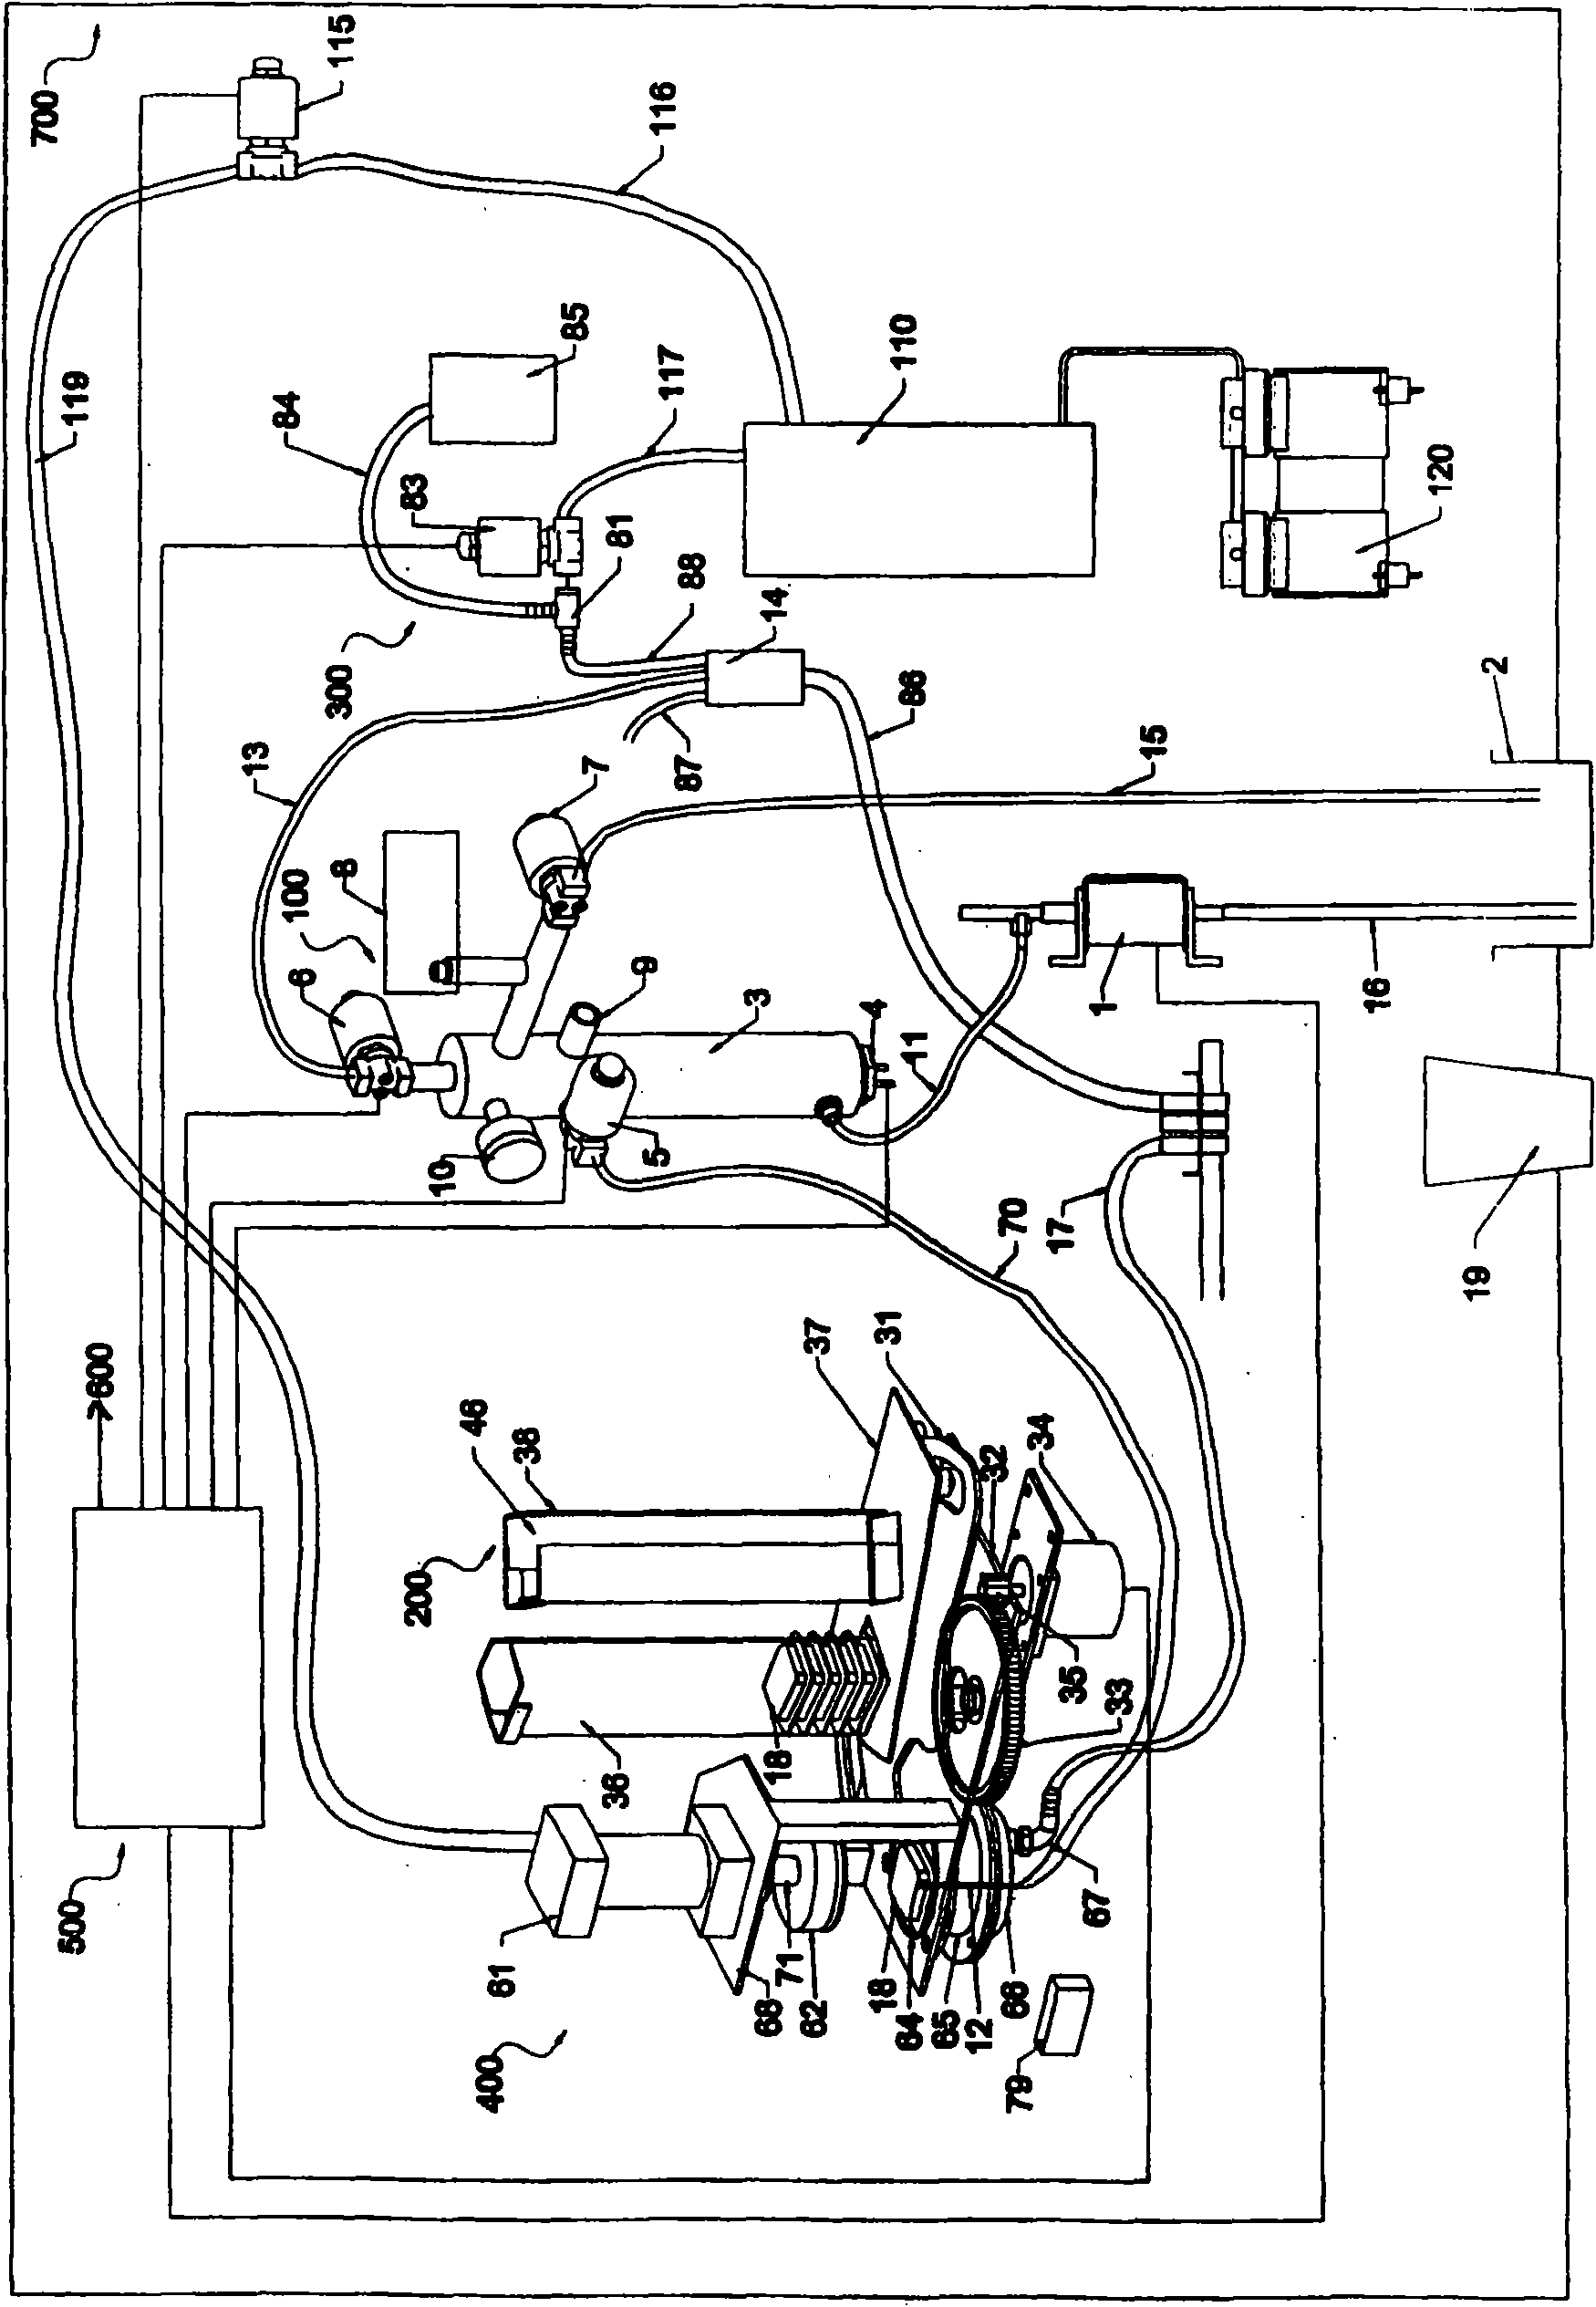 An assembly for automatic fresh brewing of hot beverage and dispensing thereof